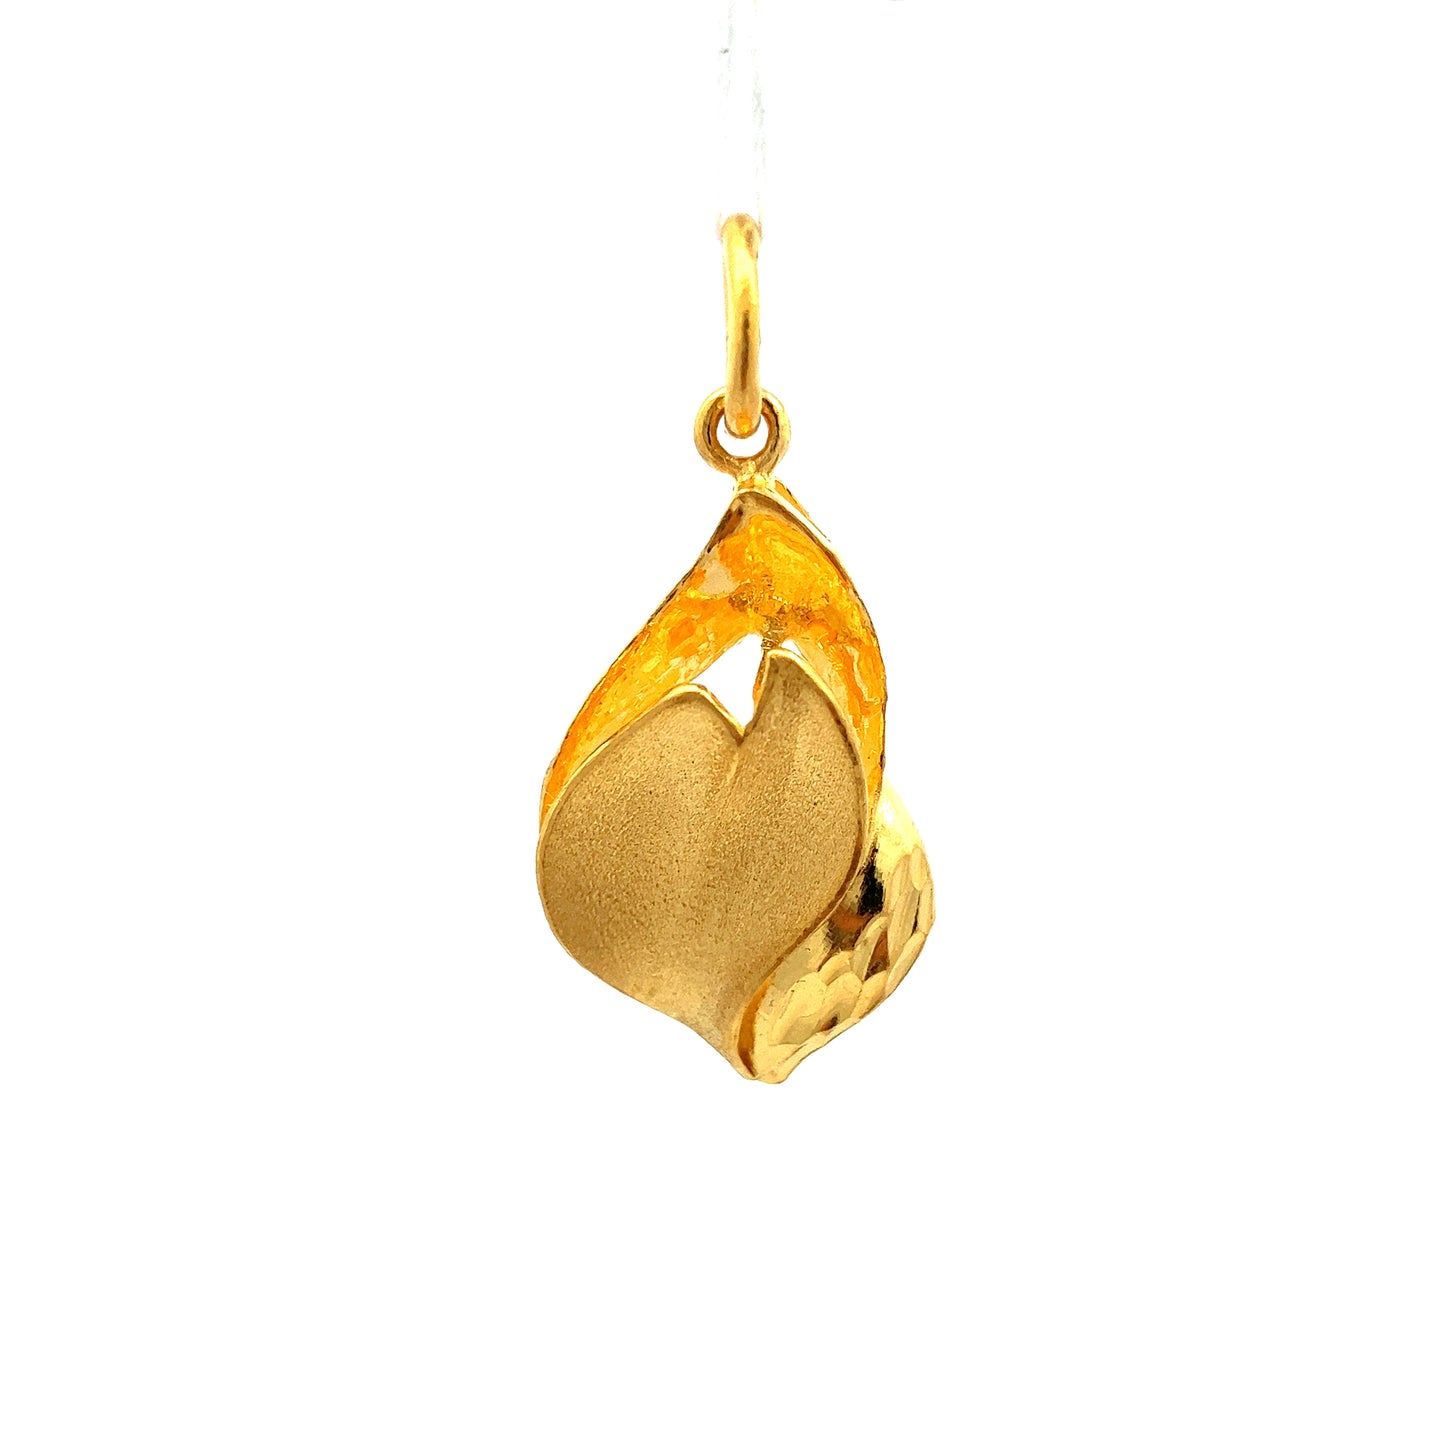 GOLD PENDANT ( 24K ) ( 5.43g ) - 0012917 Chain sold separately